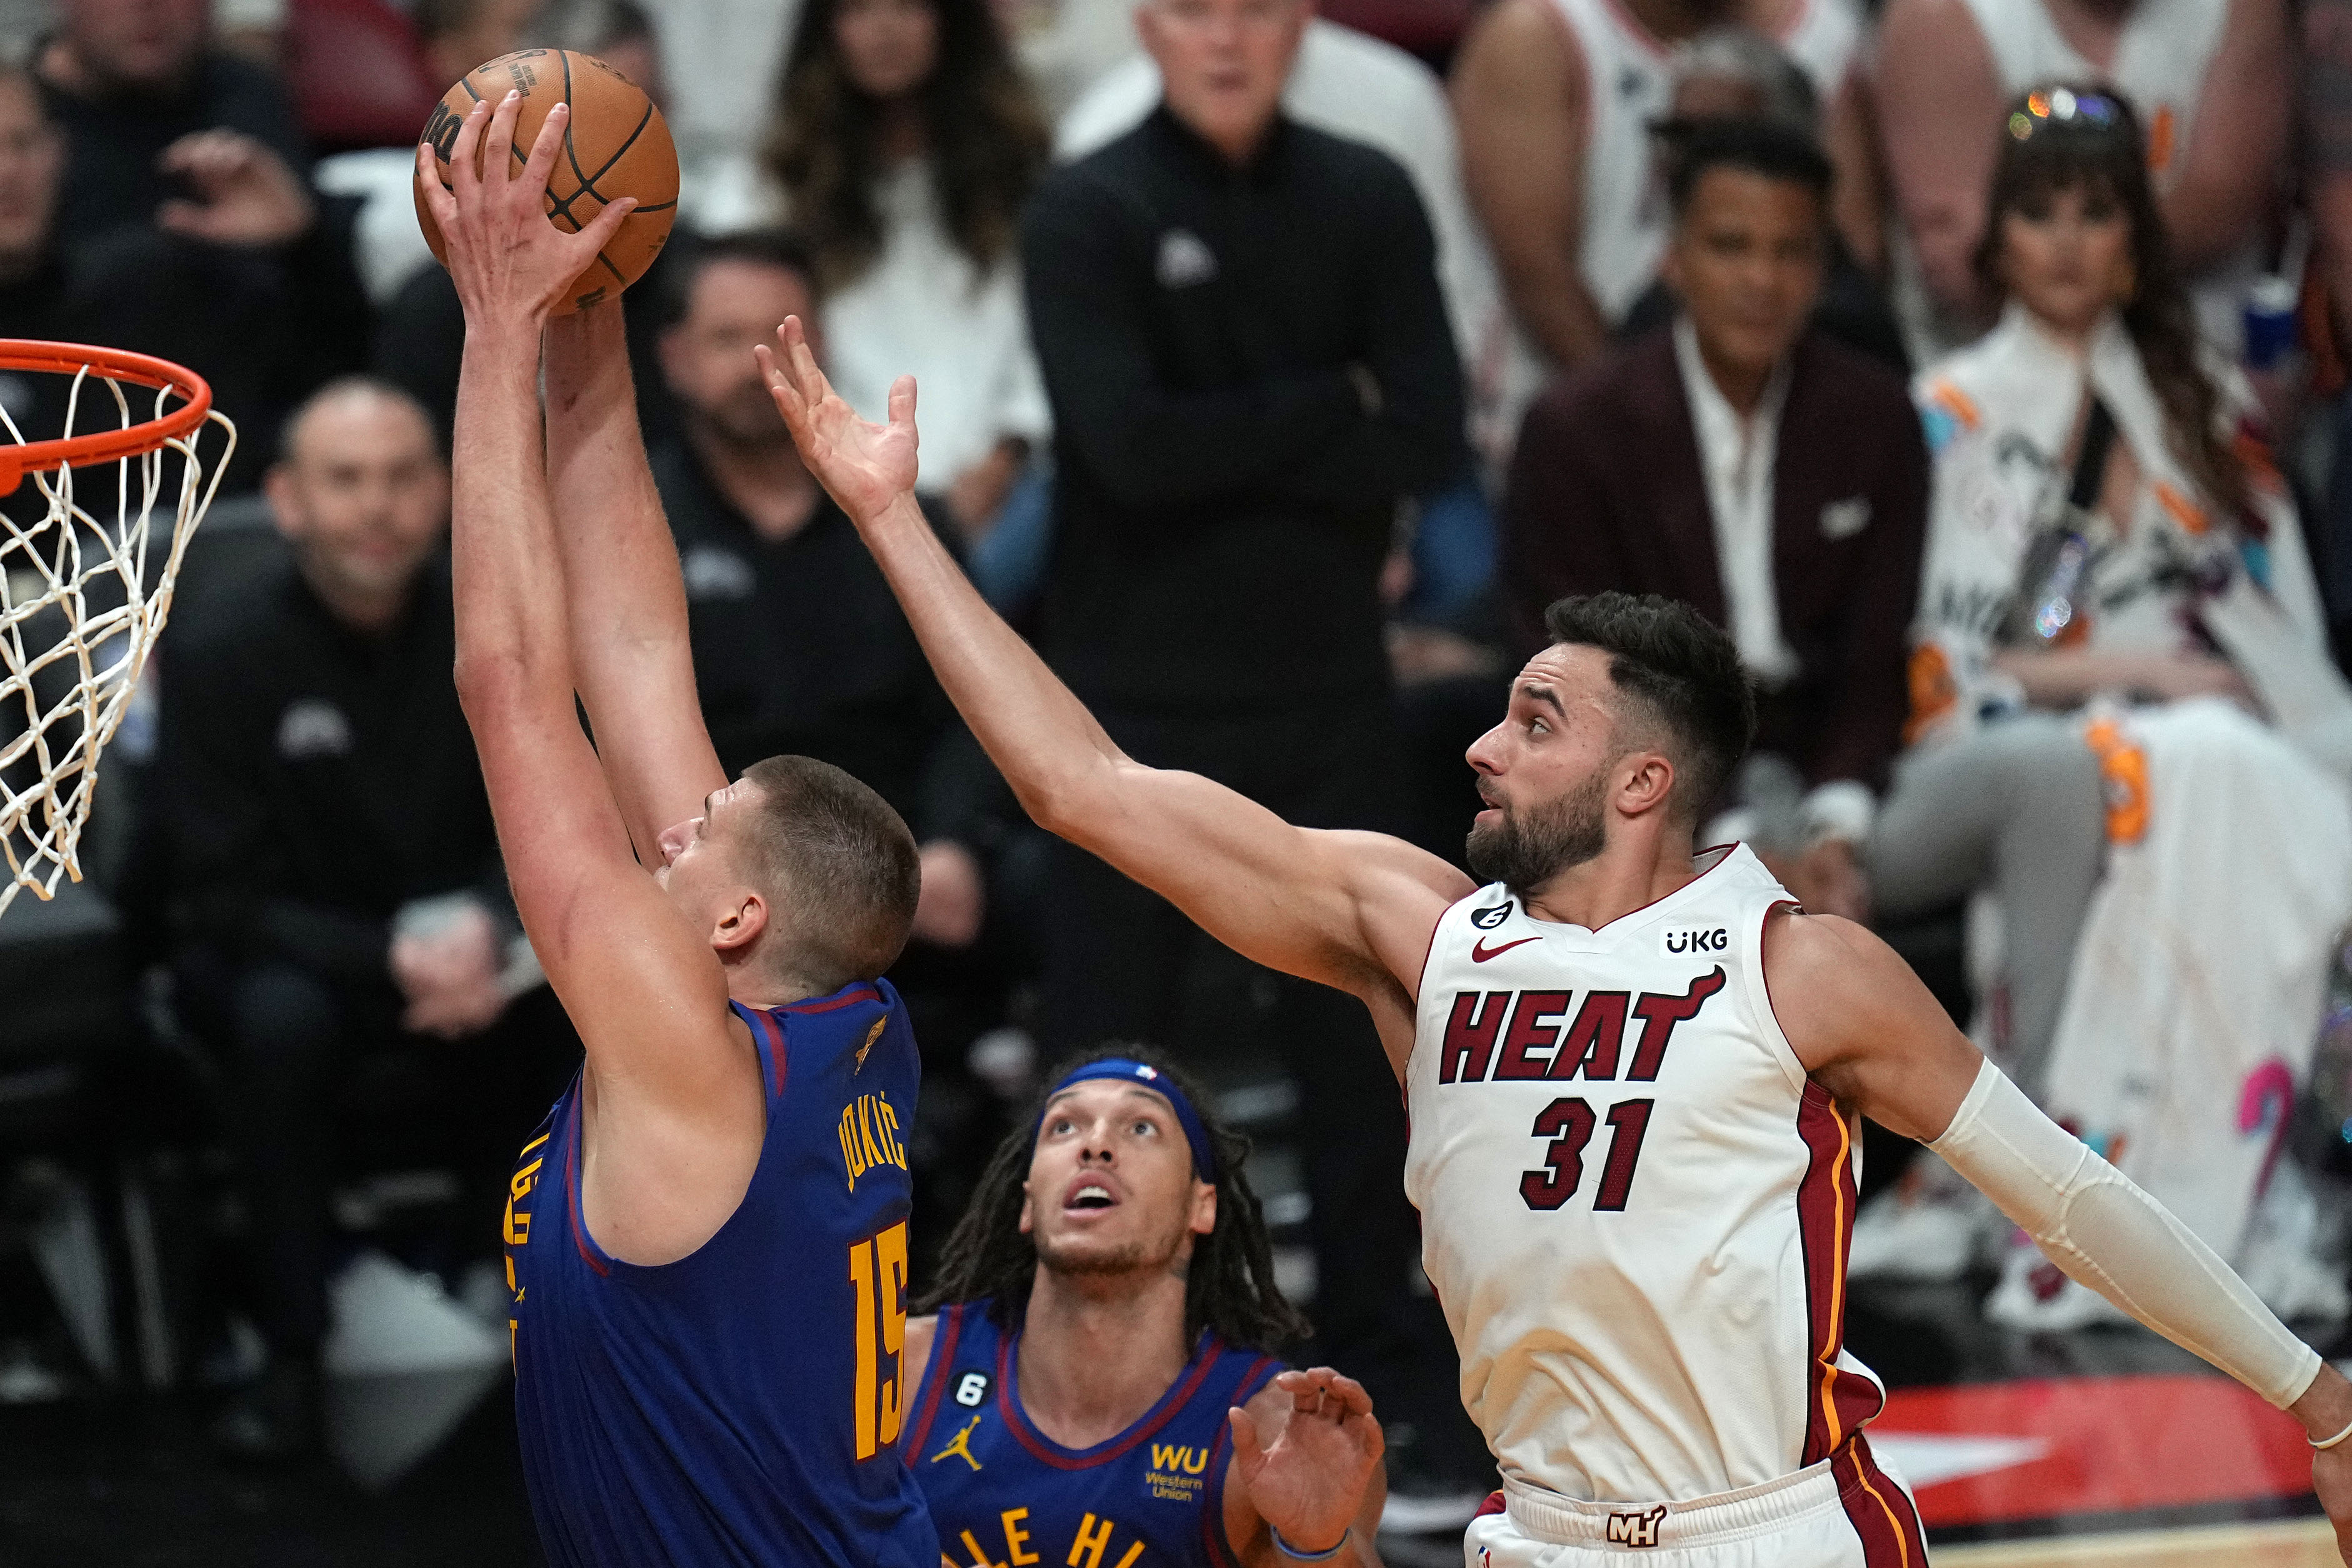 Miami Heat falls to the Denver Nuggests in NBA finals